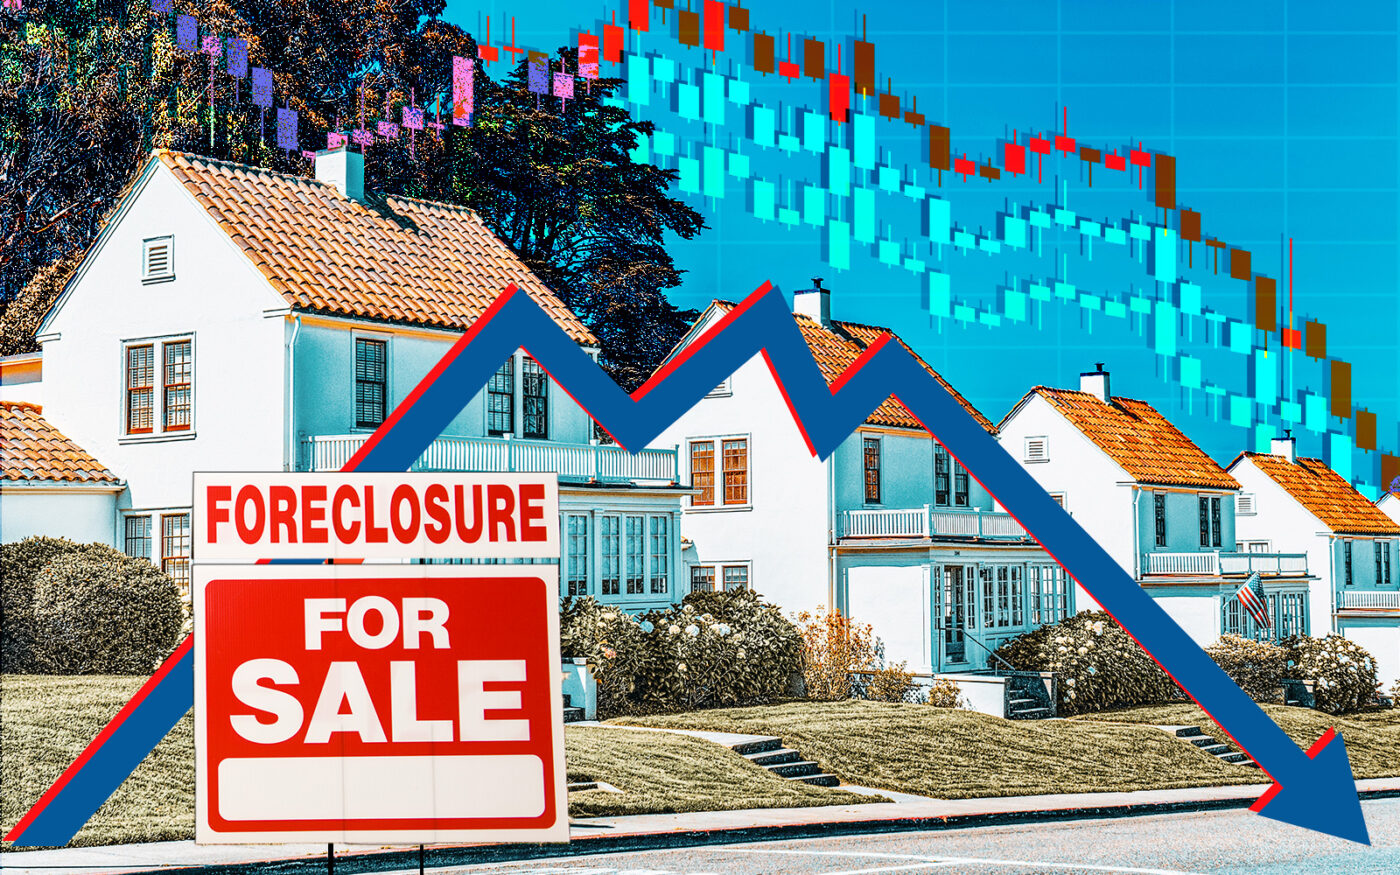 Foreclosures in decline in Cook County, IL